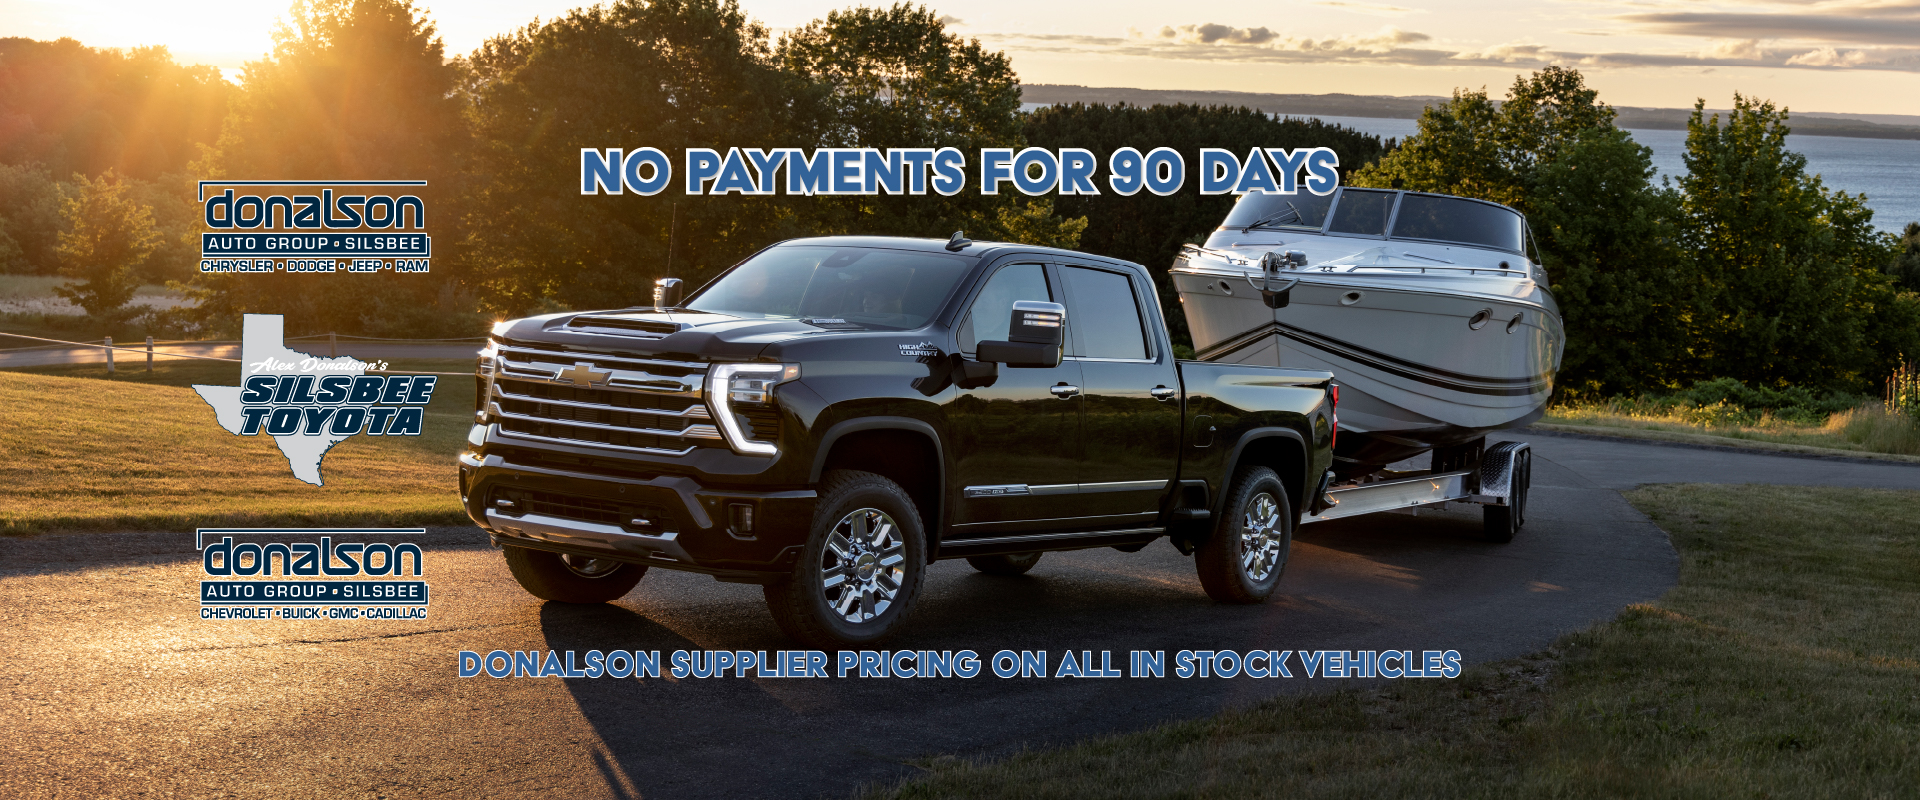 90 days no pay when you purchase from Donalson Auto Group and finance with Mobiloil Credit Union